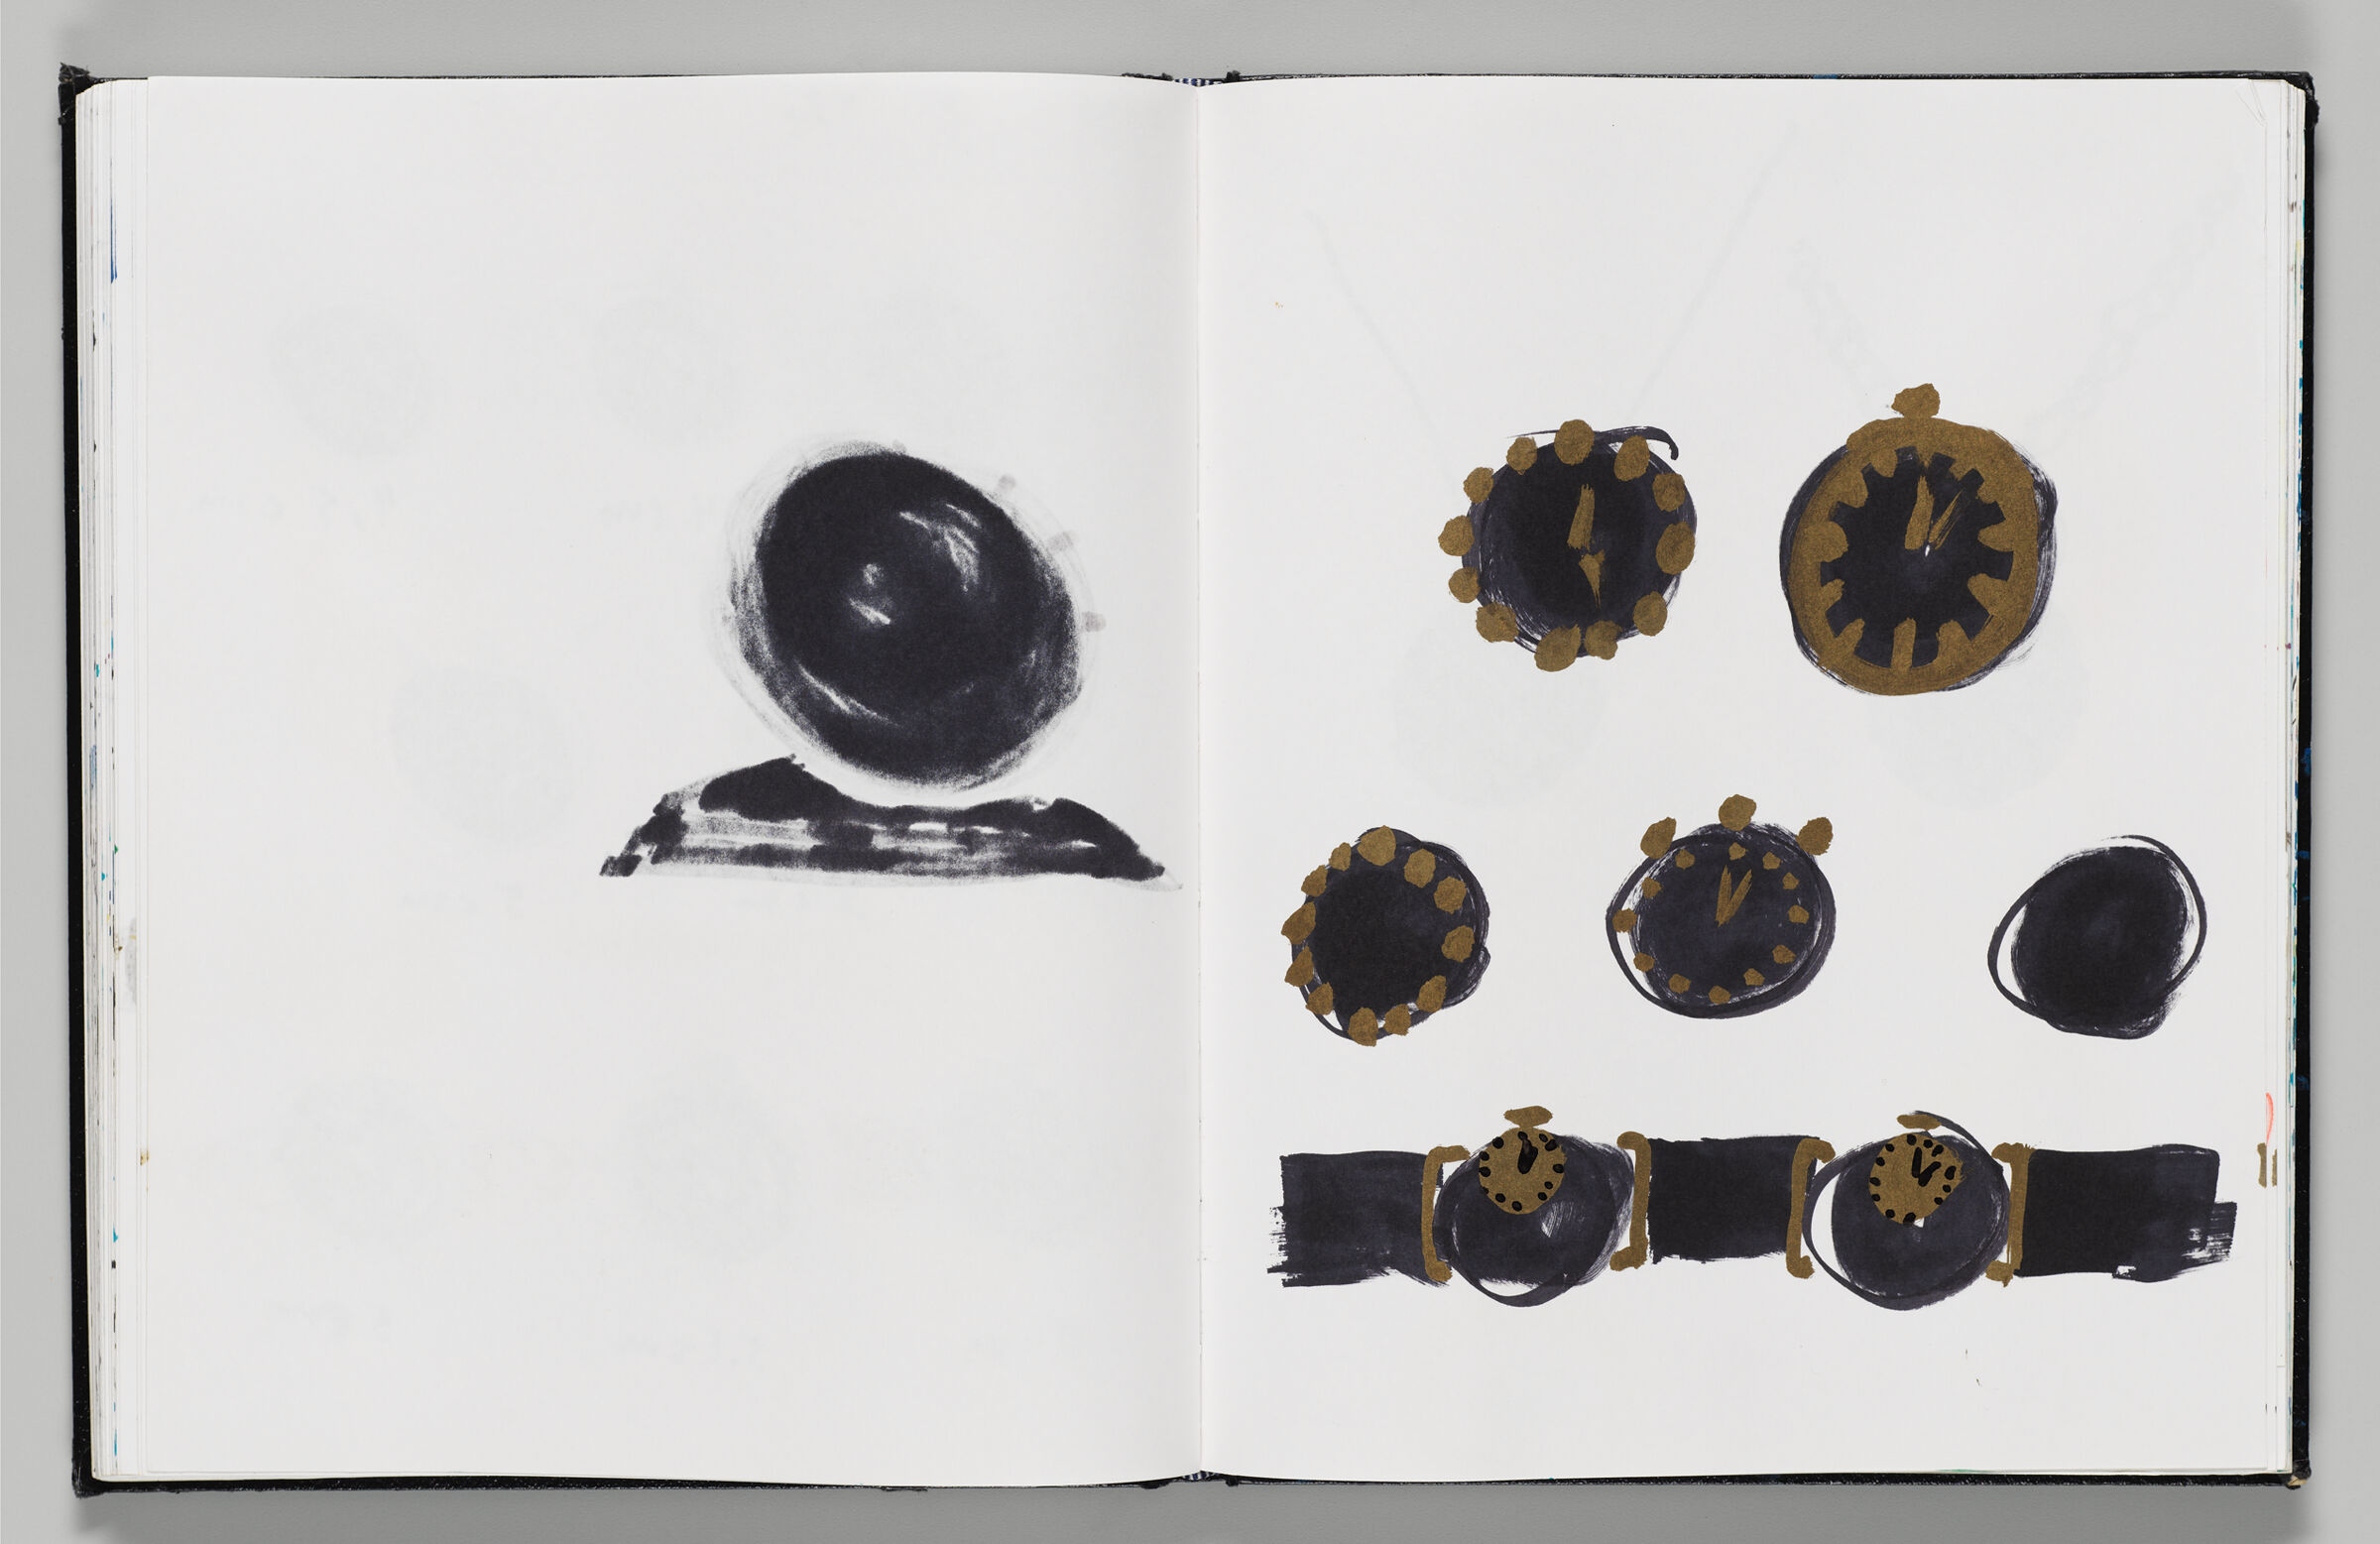 Untitled (Bleed-Through Of Previous Page, Left Page); Untitled (Watch Designs, Right Page)